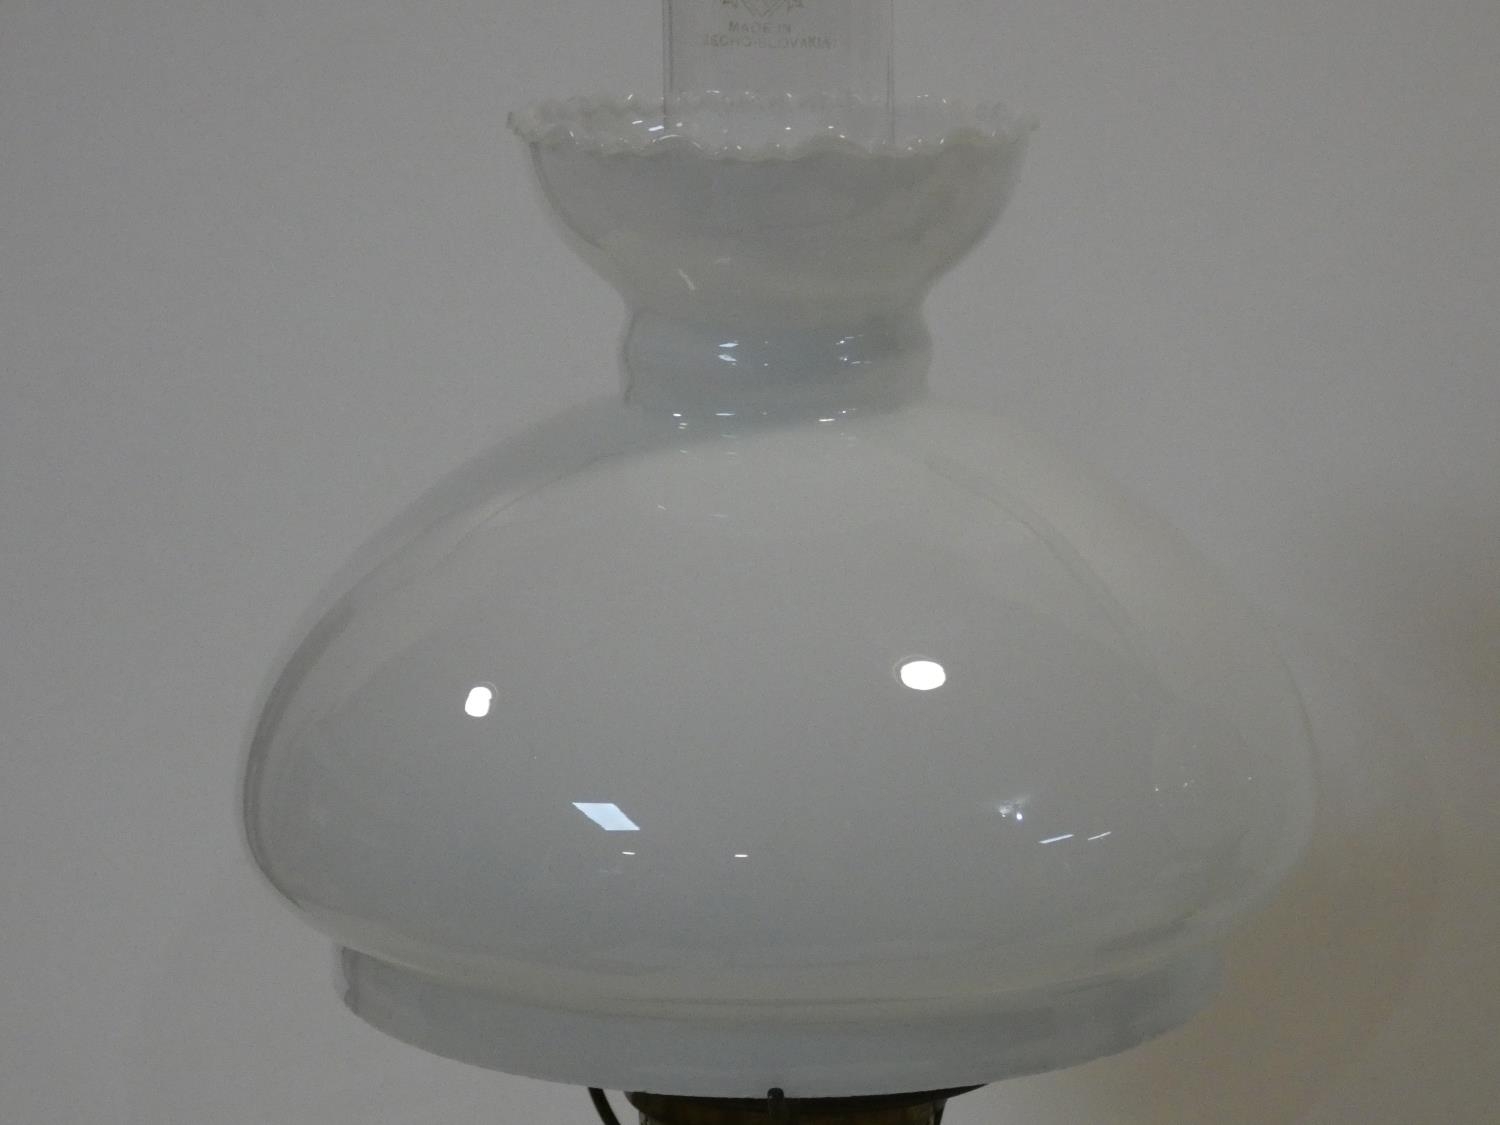 A 19th century oil lamp with etched shade and glass reservoir, Messenger No. 2 Duplex Patent and a - Image 10 of 13